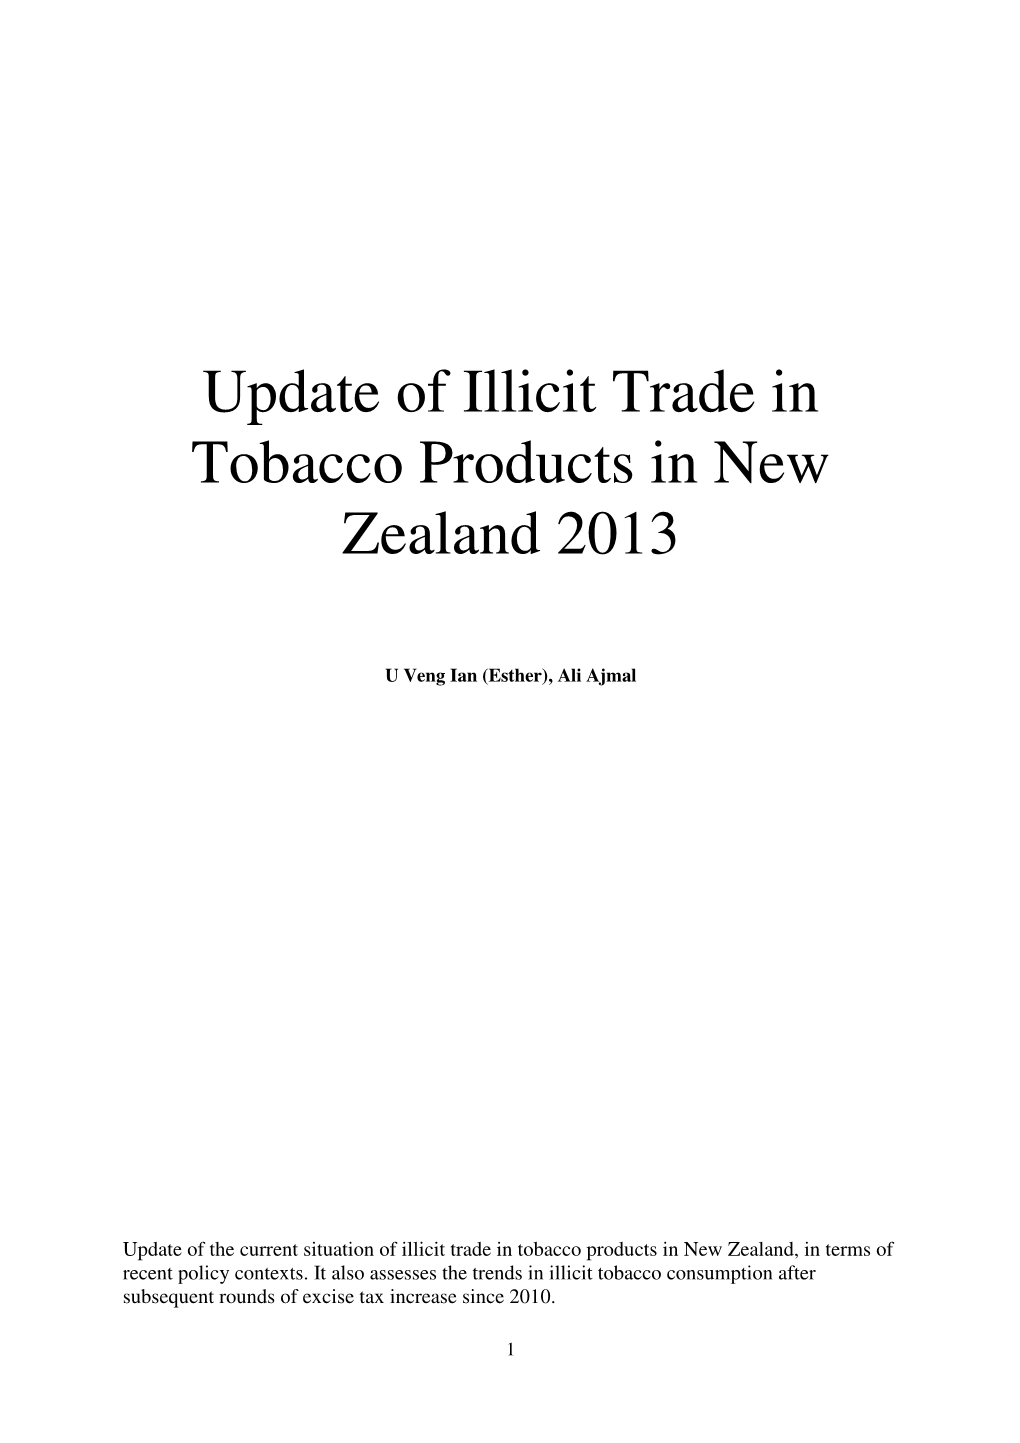 Update of Illicit Trade in Tobacco Products in New Zealand 2013